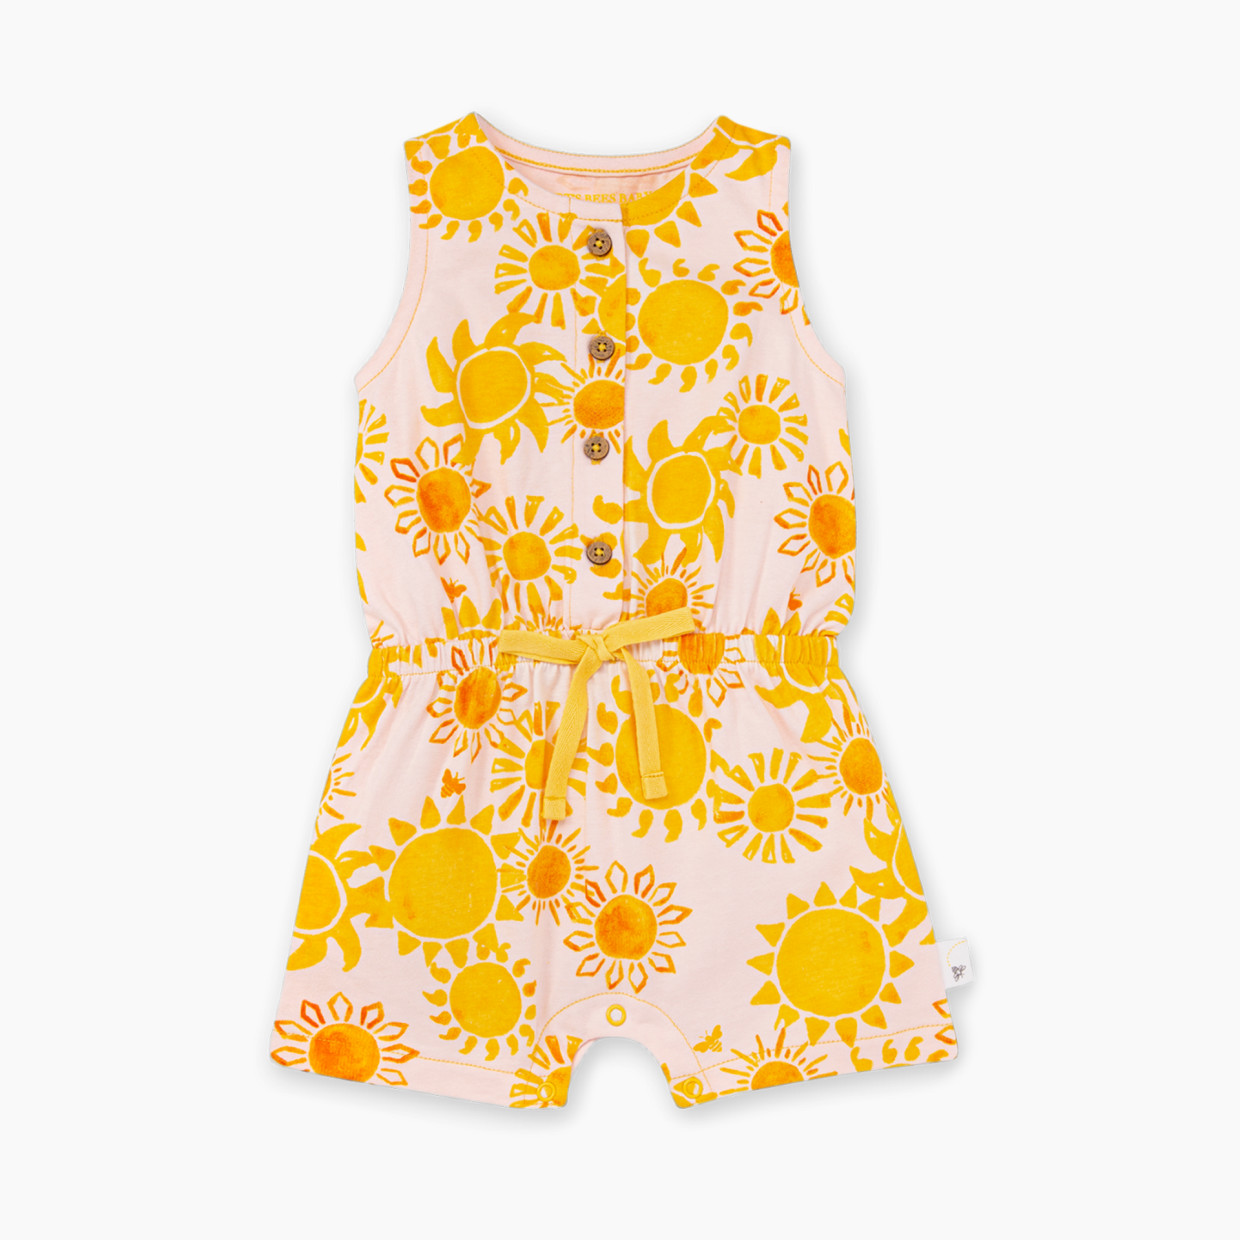 Burt's Bees Baby Organic Cotton Romper Jumpsuit - Here Comes The Sun, 0-3 Months.